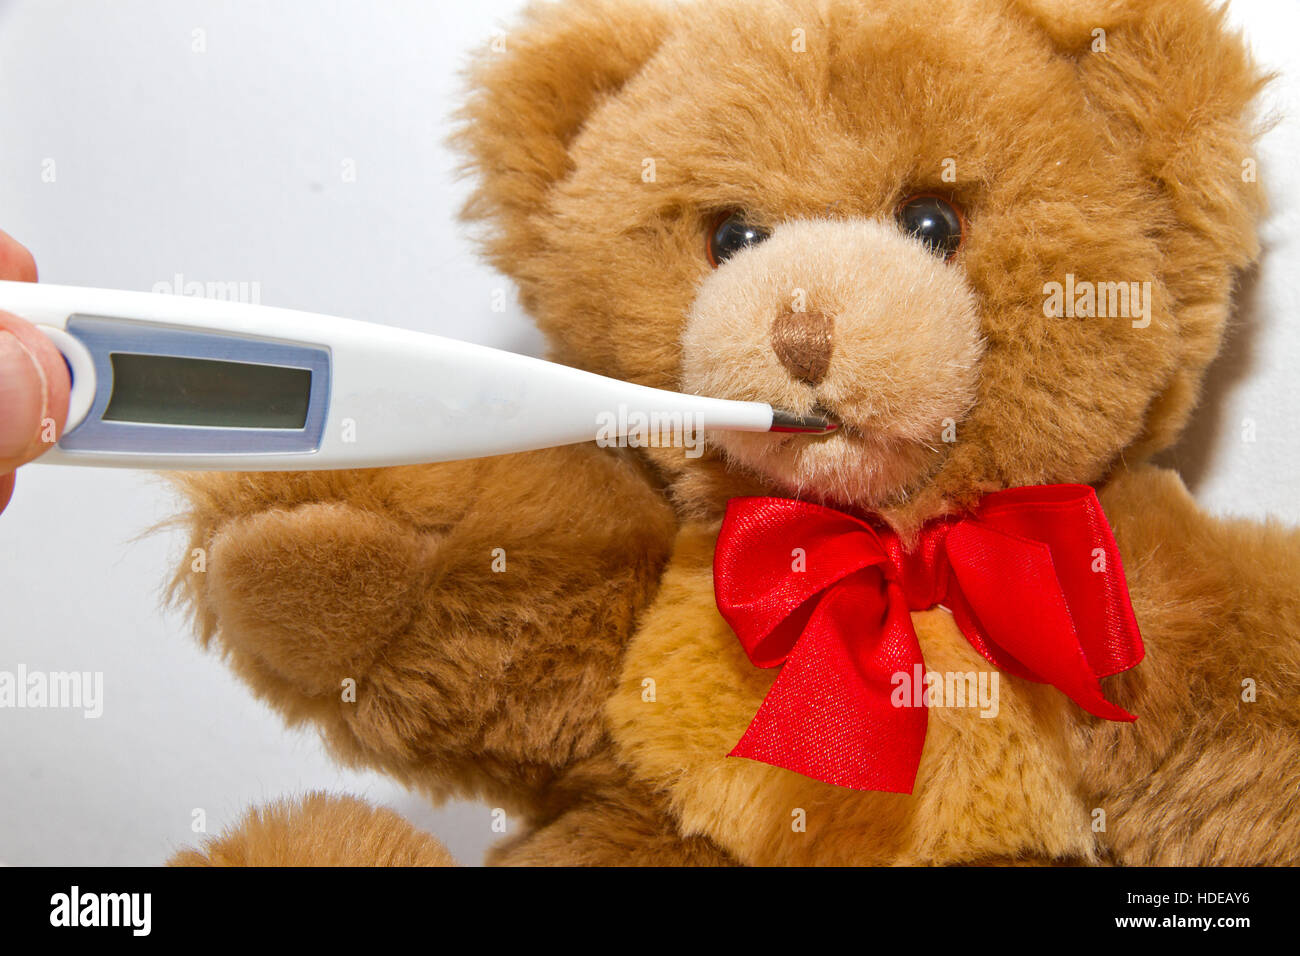 Teddy Bear with Clinical Thermometer Stock Photo